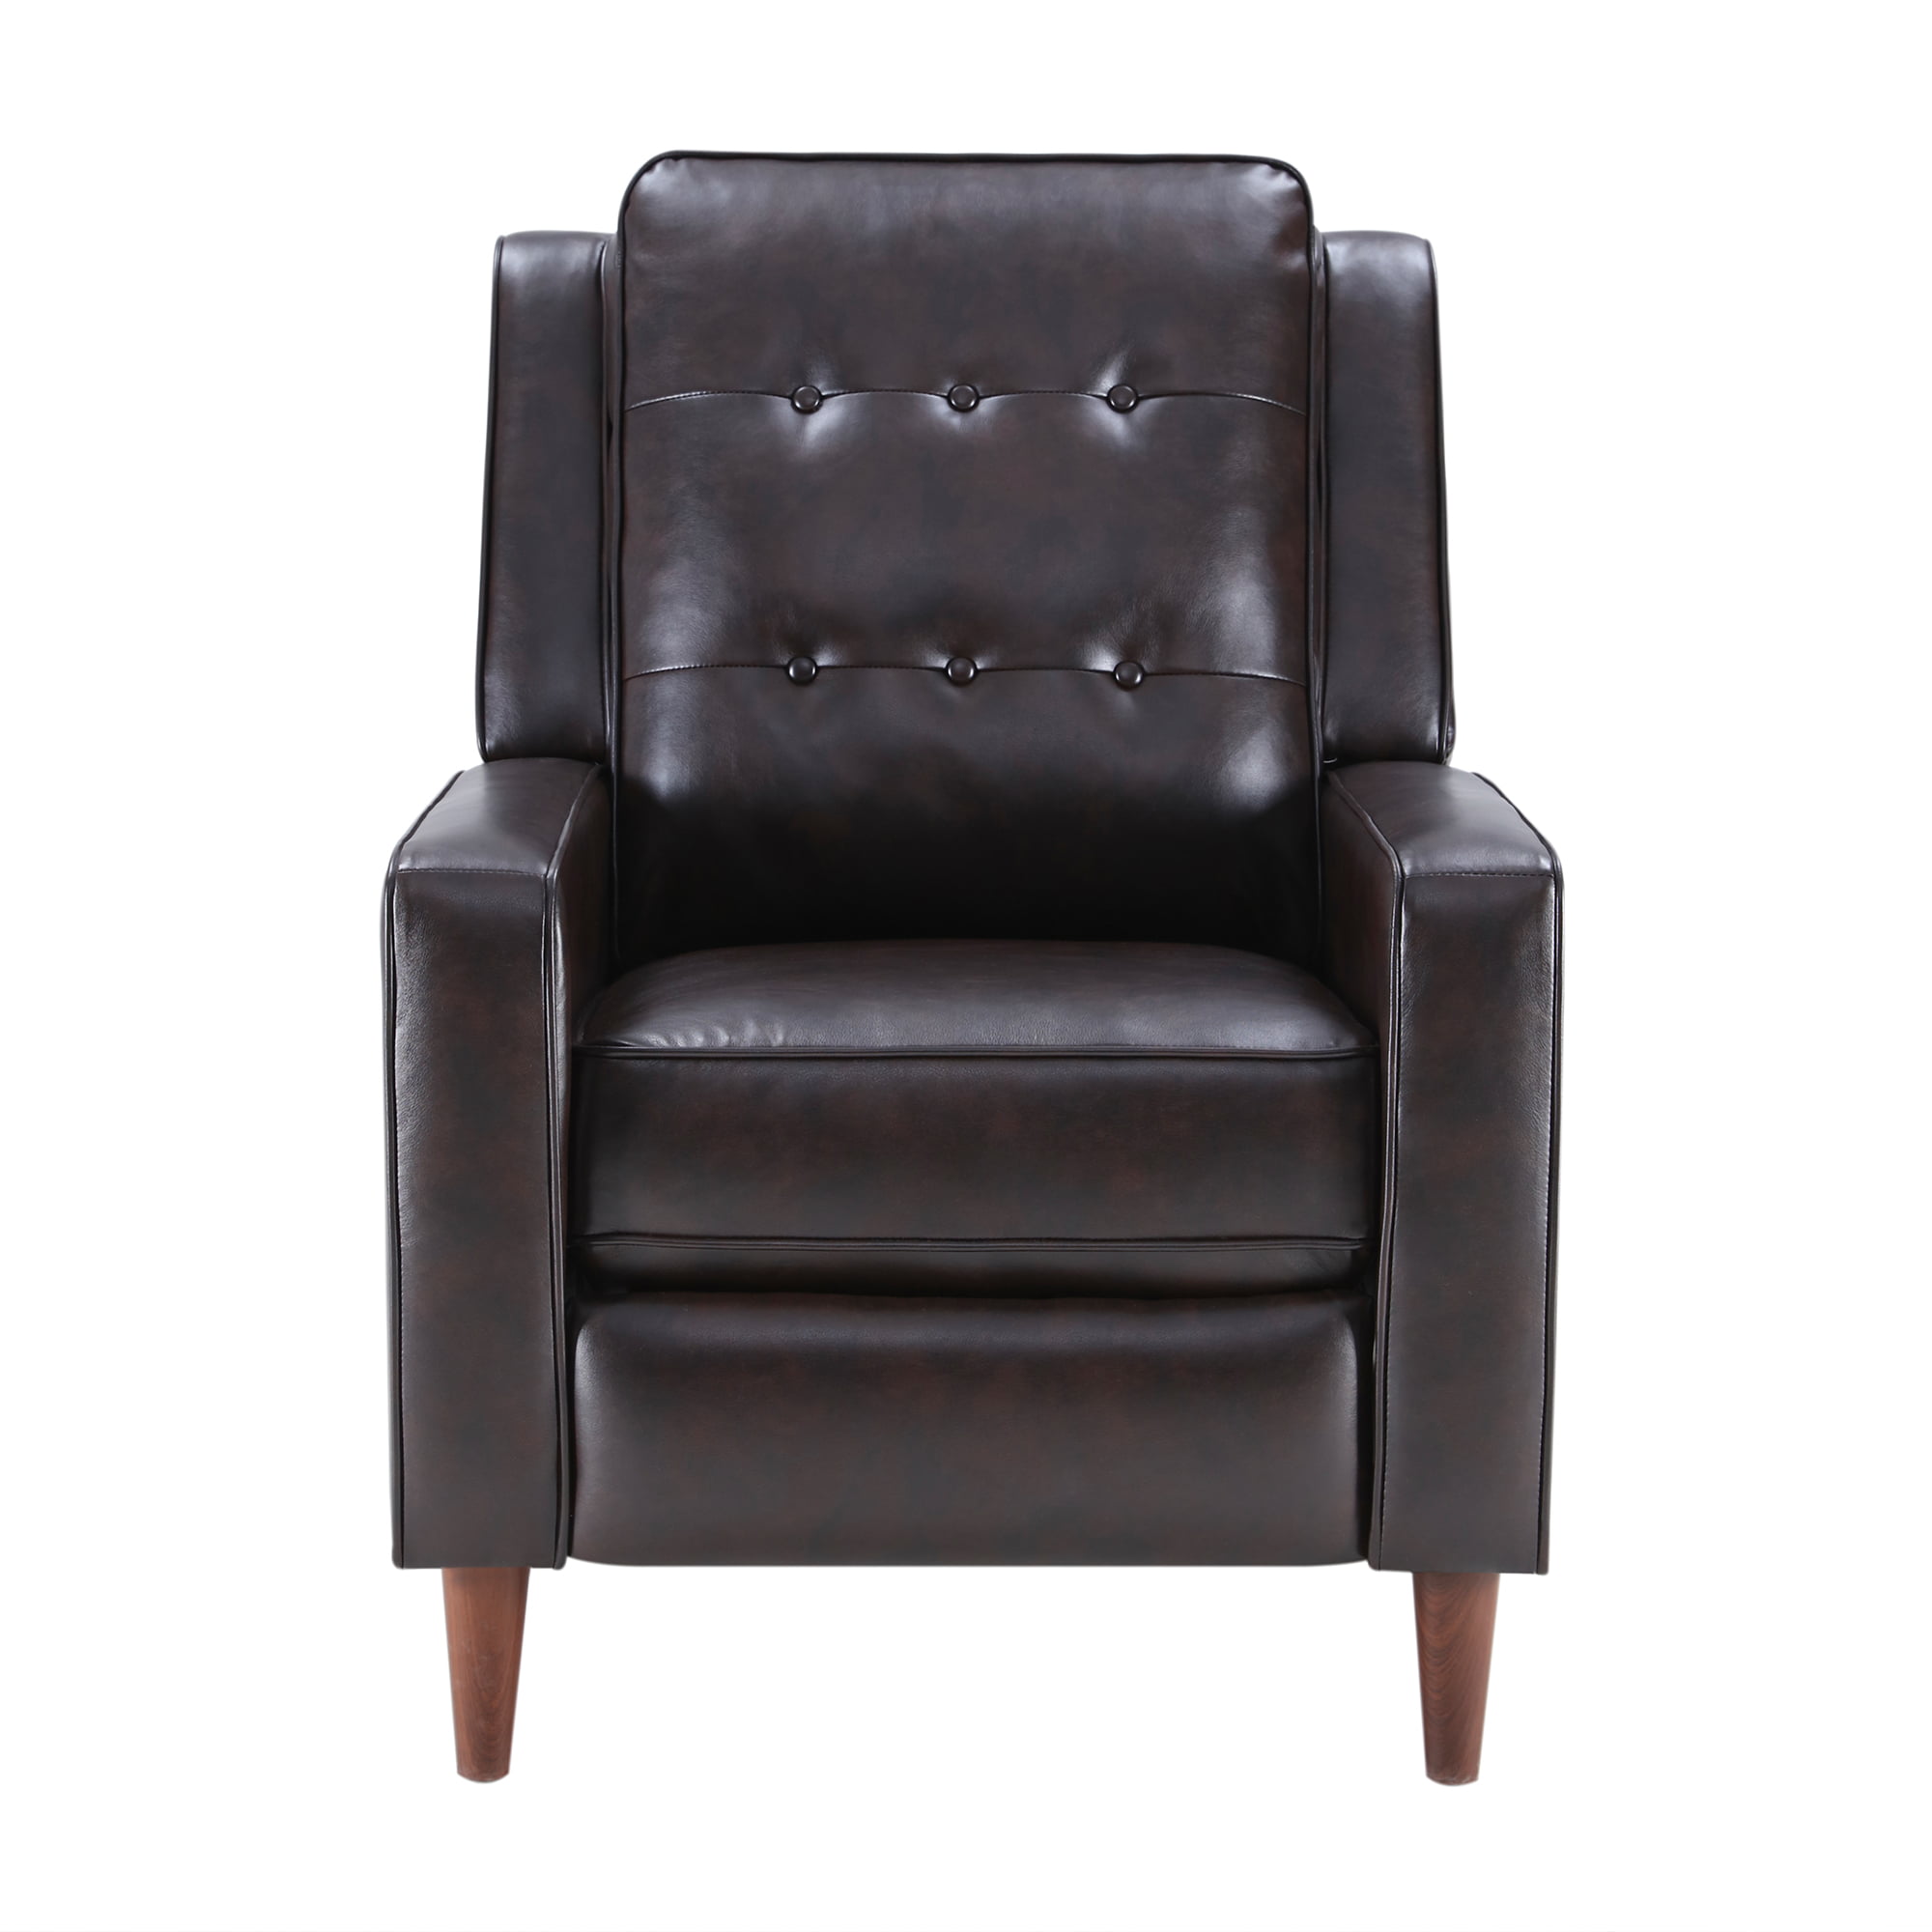 Back Recliner Chair Arm, Faux Leather Club Chair Recliner